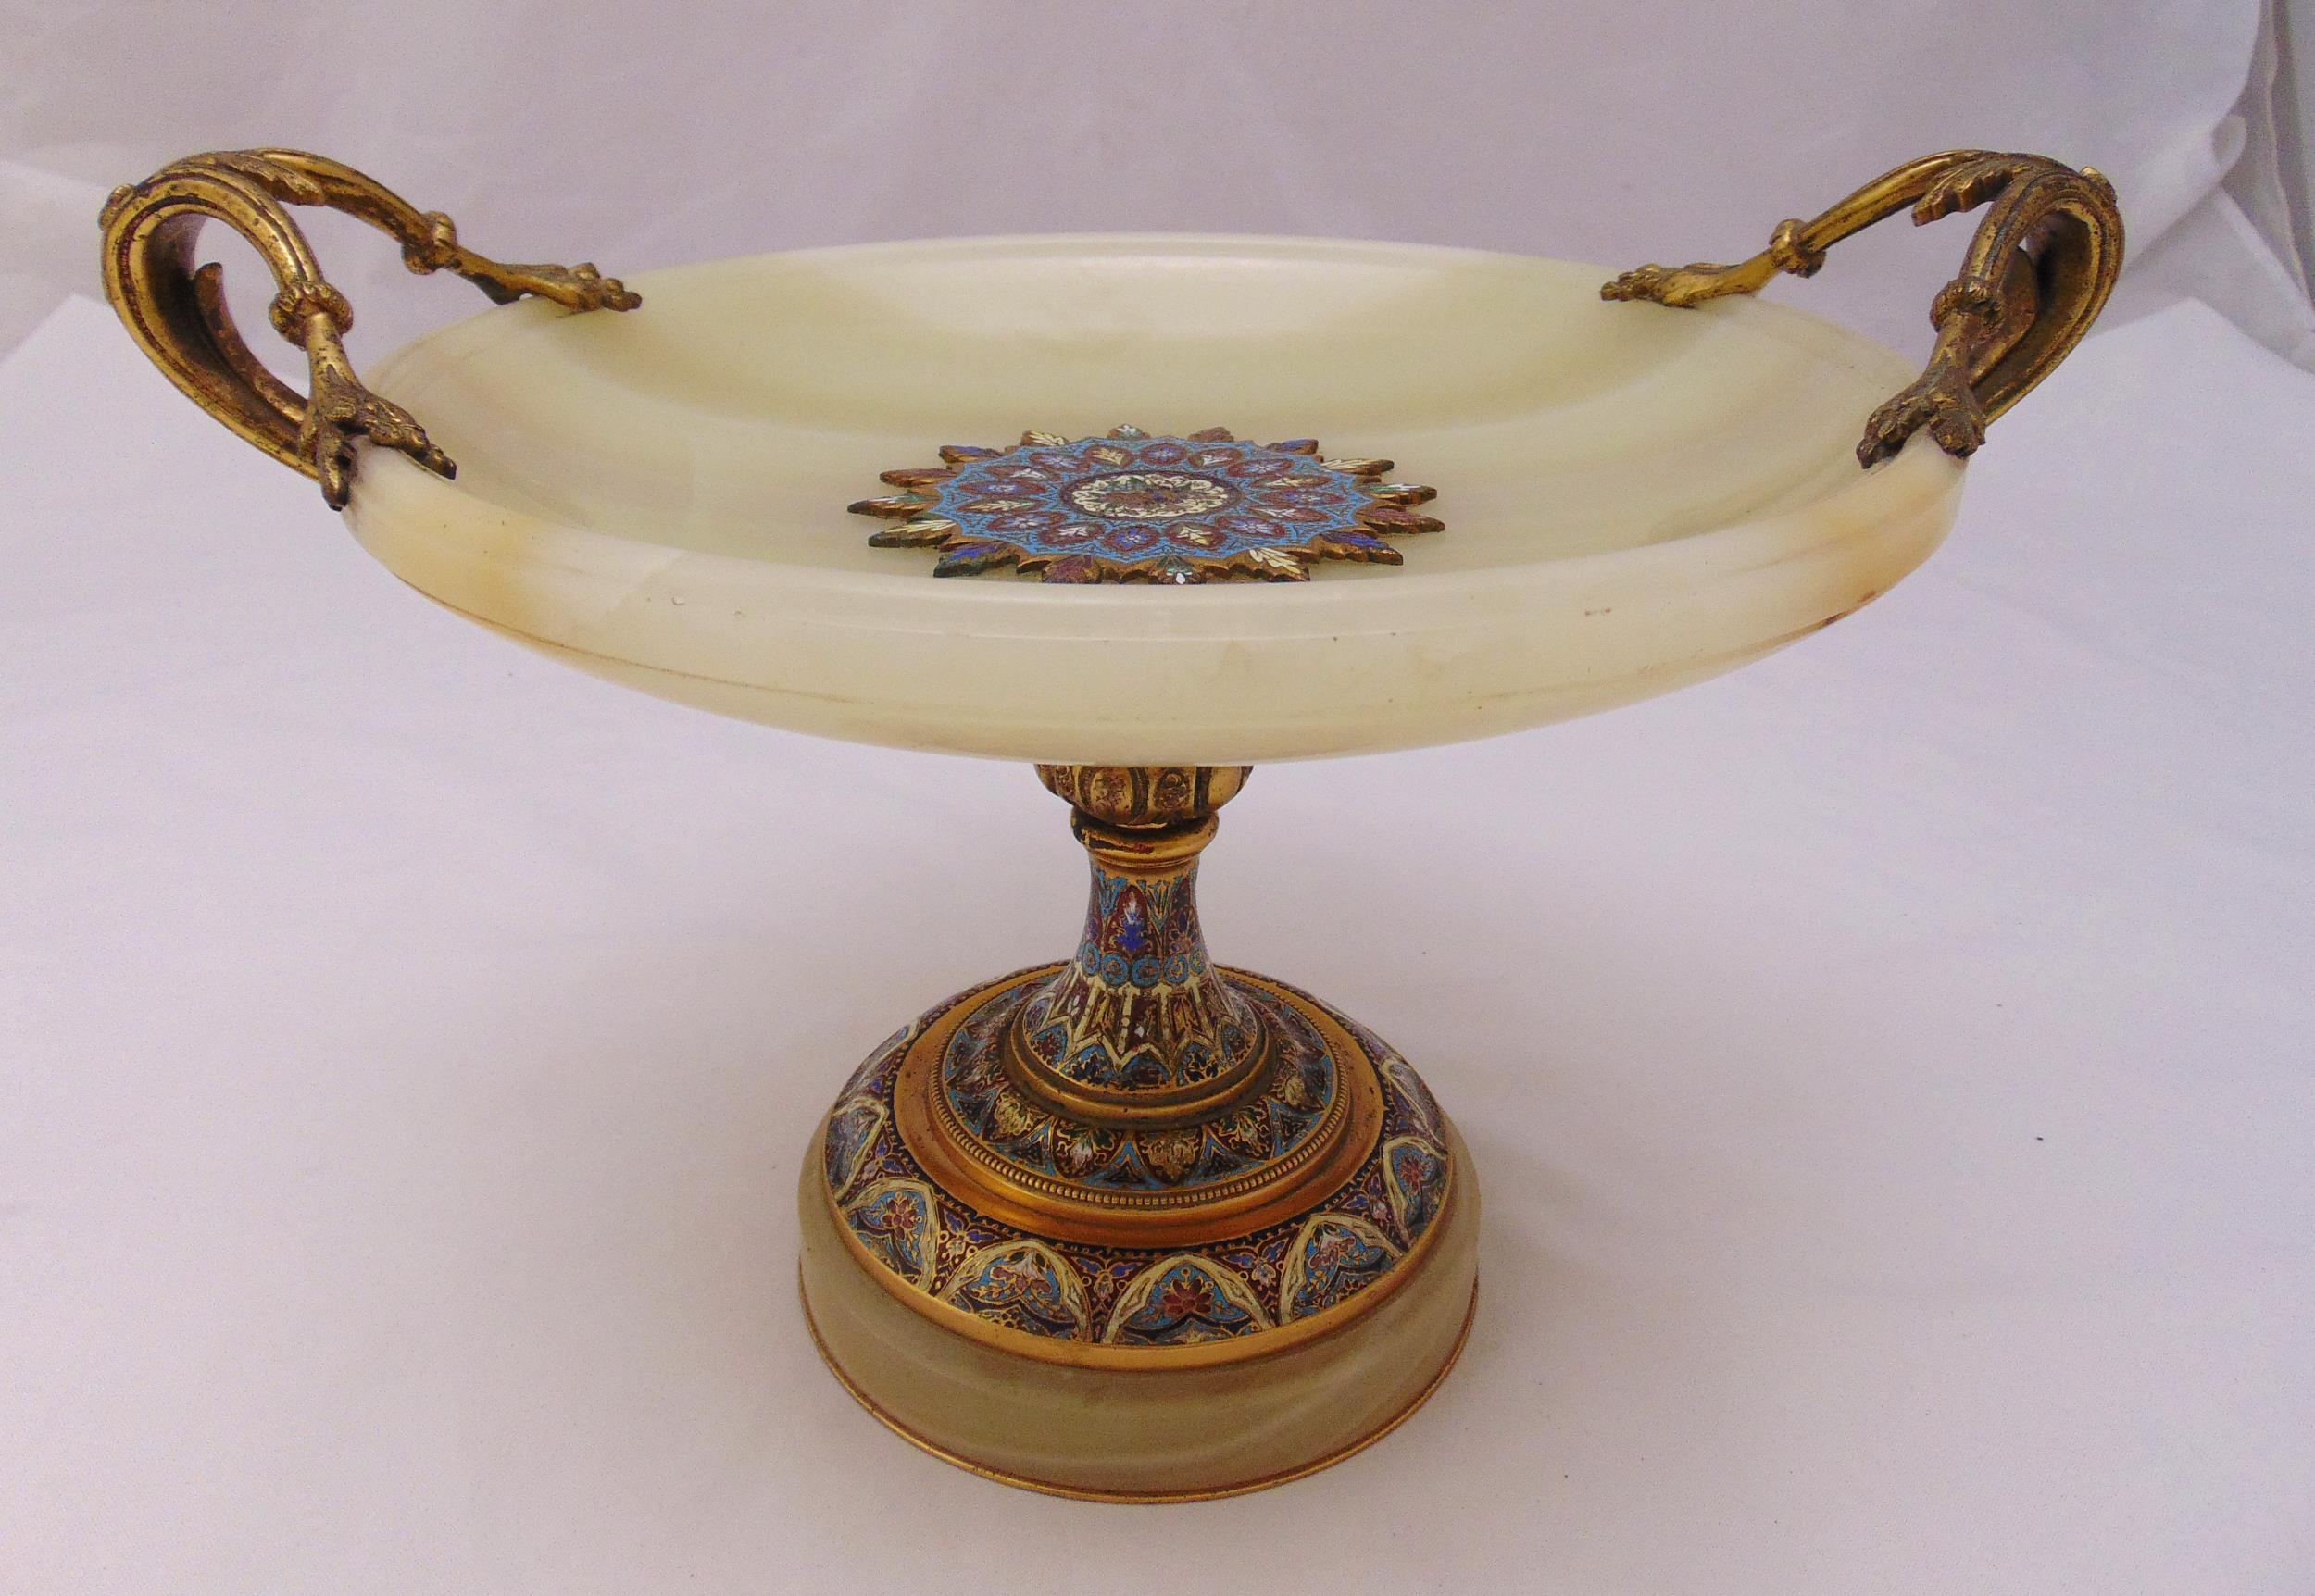 A late 19th century French onyx, champlevé and gilt metal tazza with leaf scroll side handles on